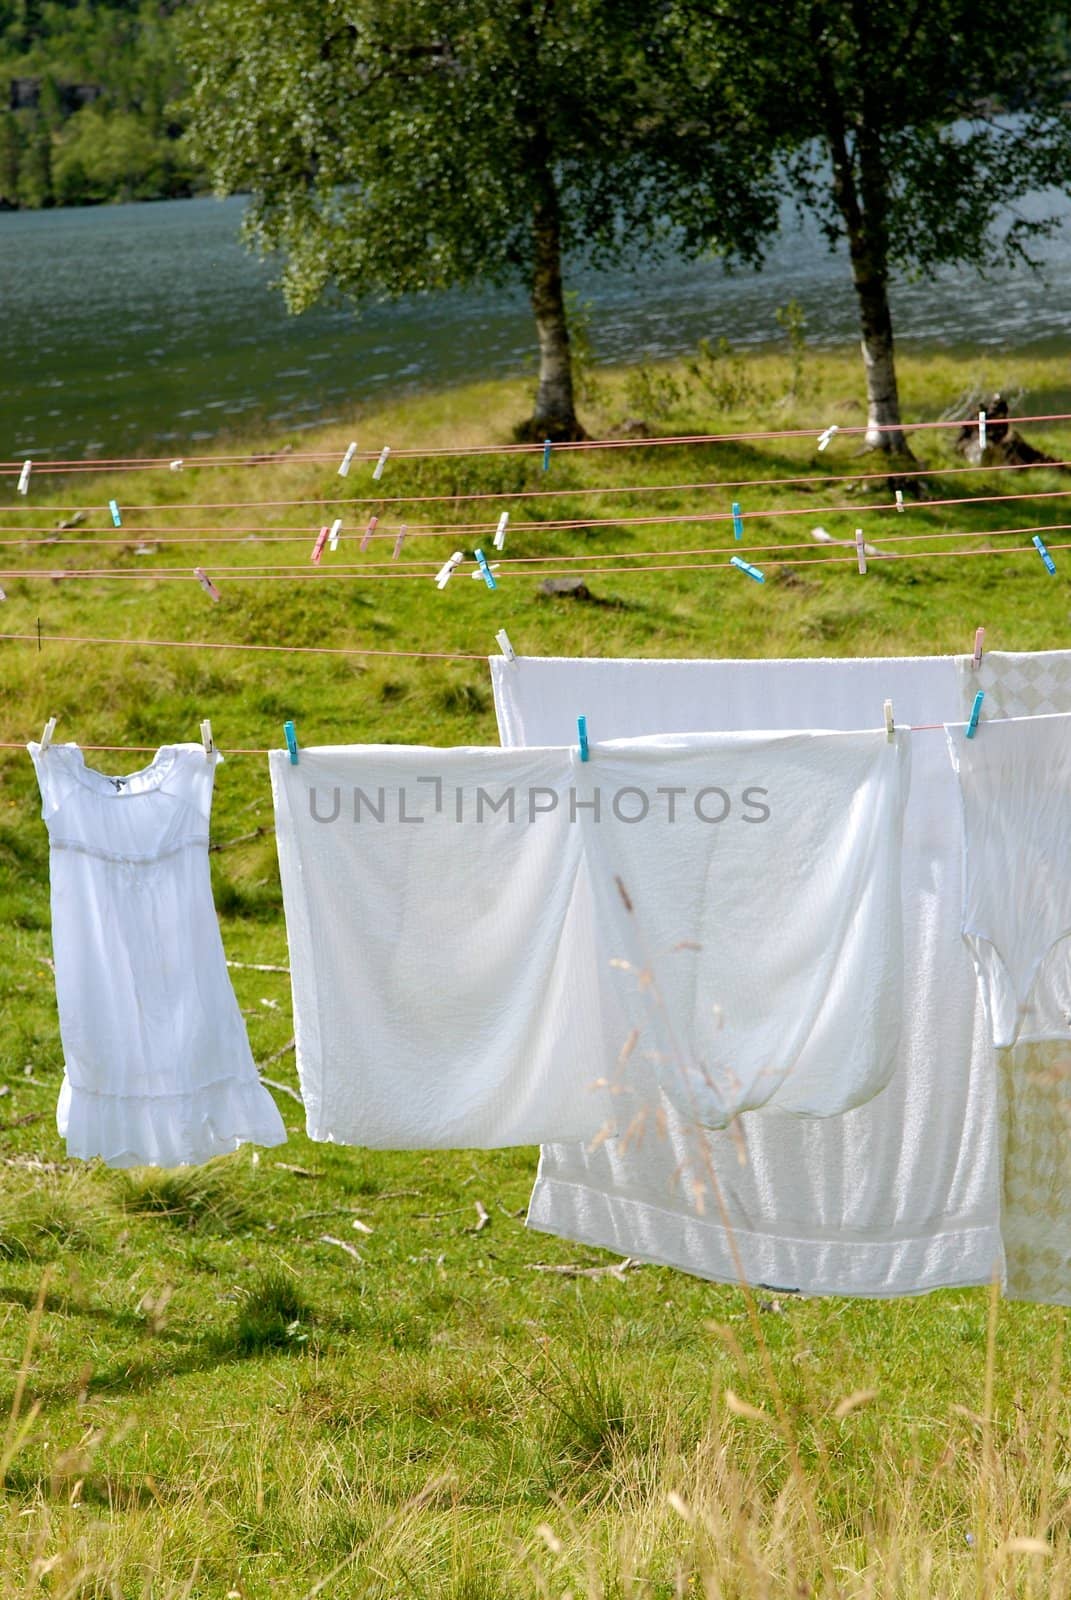 Scandinavian Lifestyle - clothes and sheets drying in the garden by Bildehagen